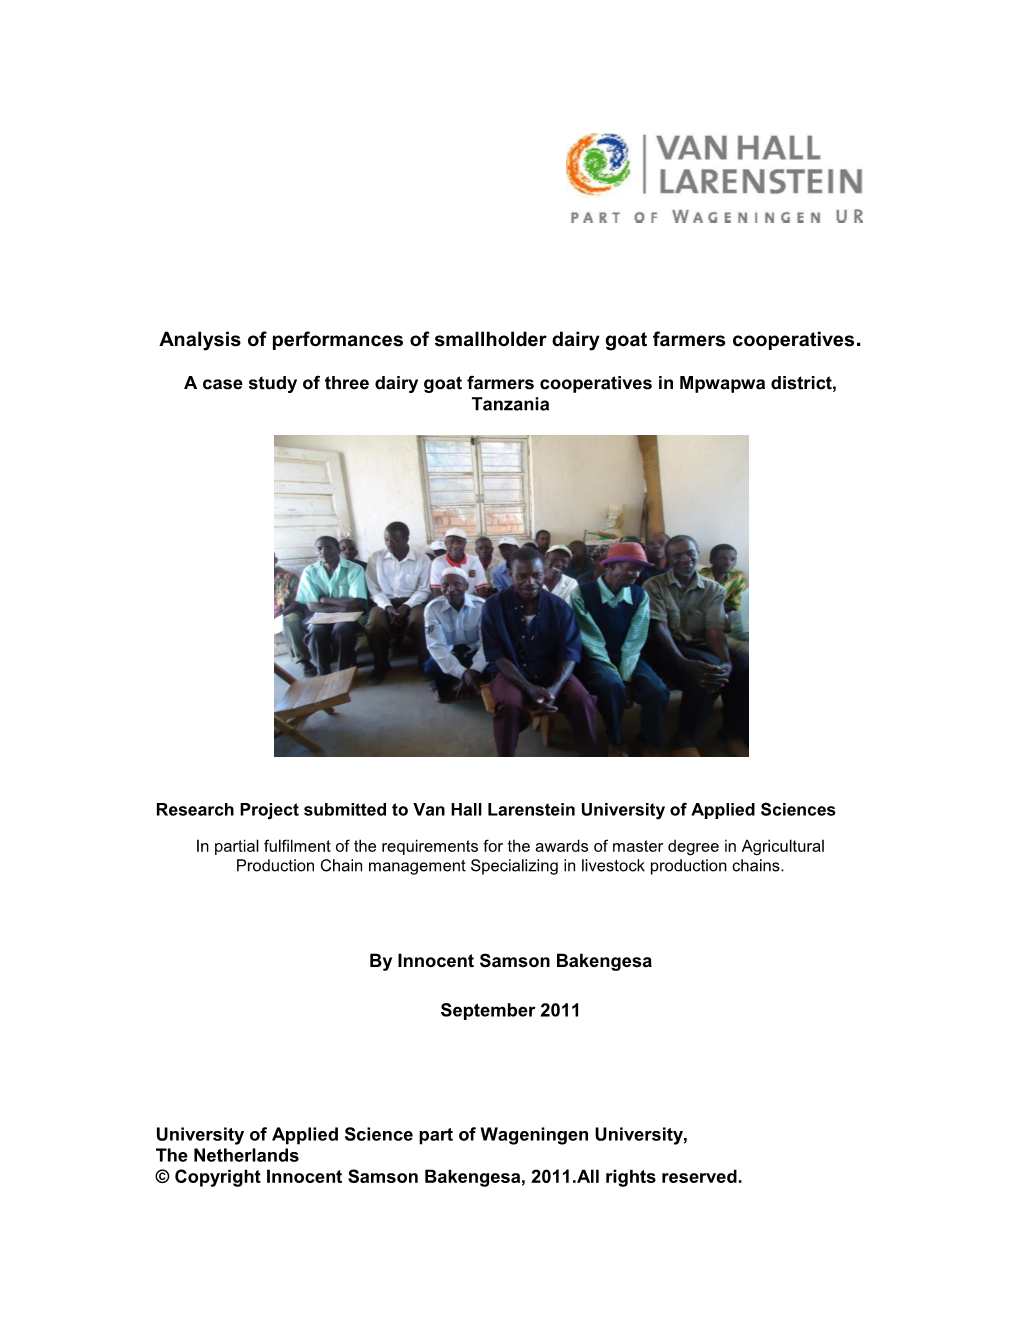 Analysis of Performances of Smallholder Dairy Goat Farmers Cooperatives